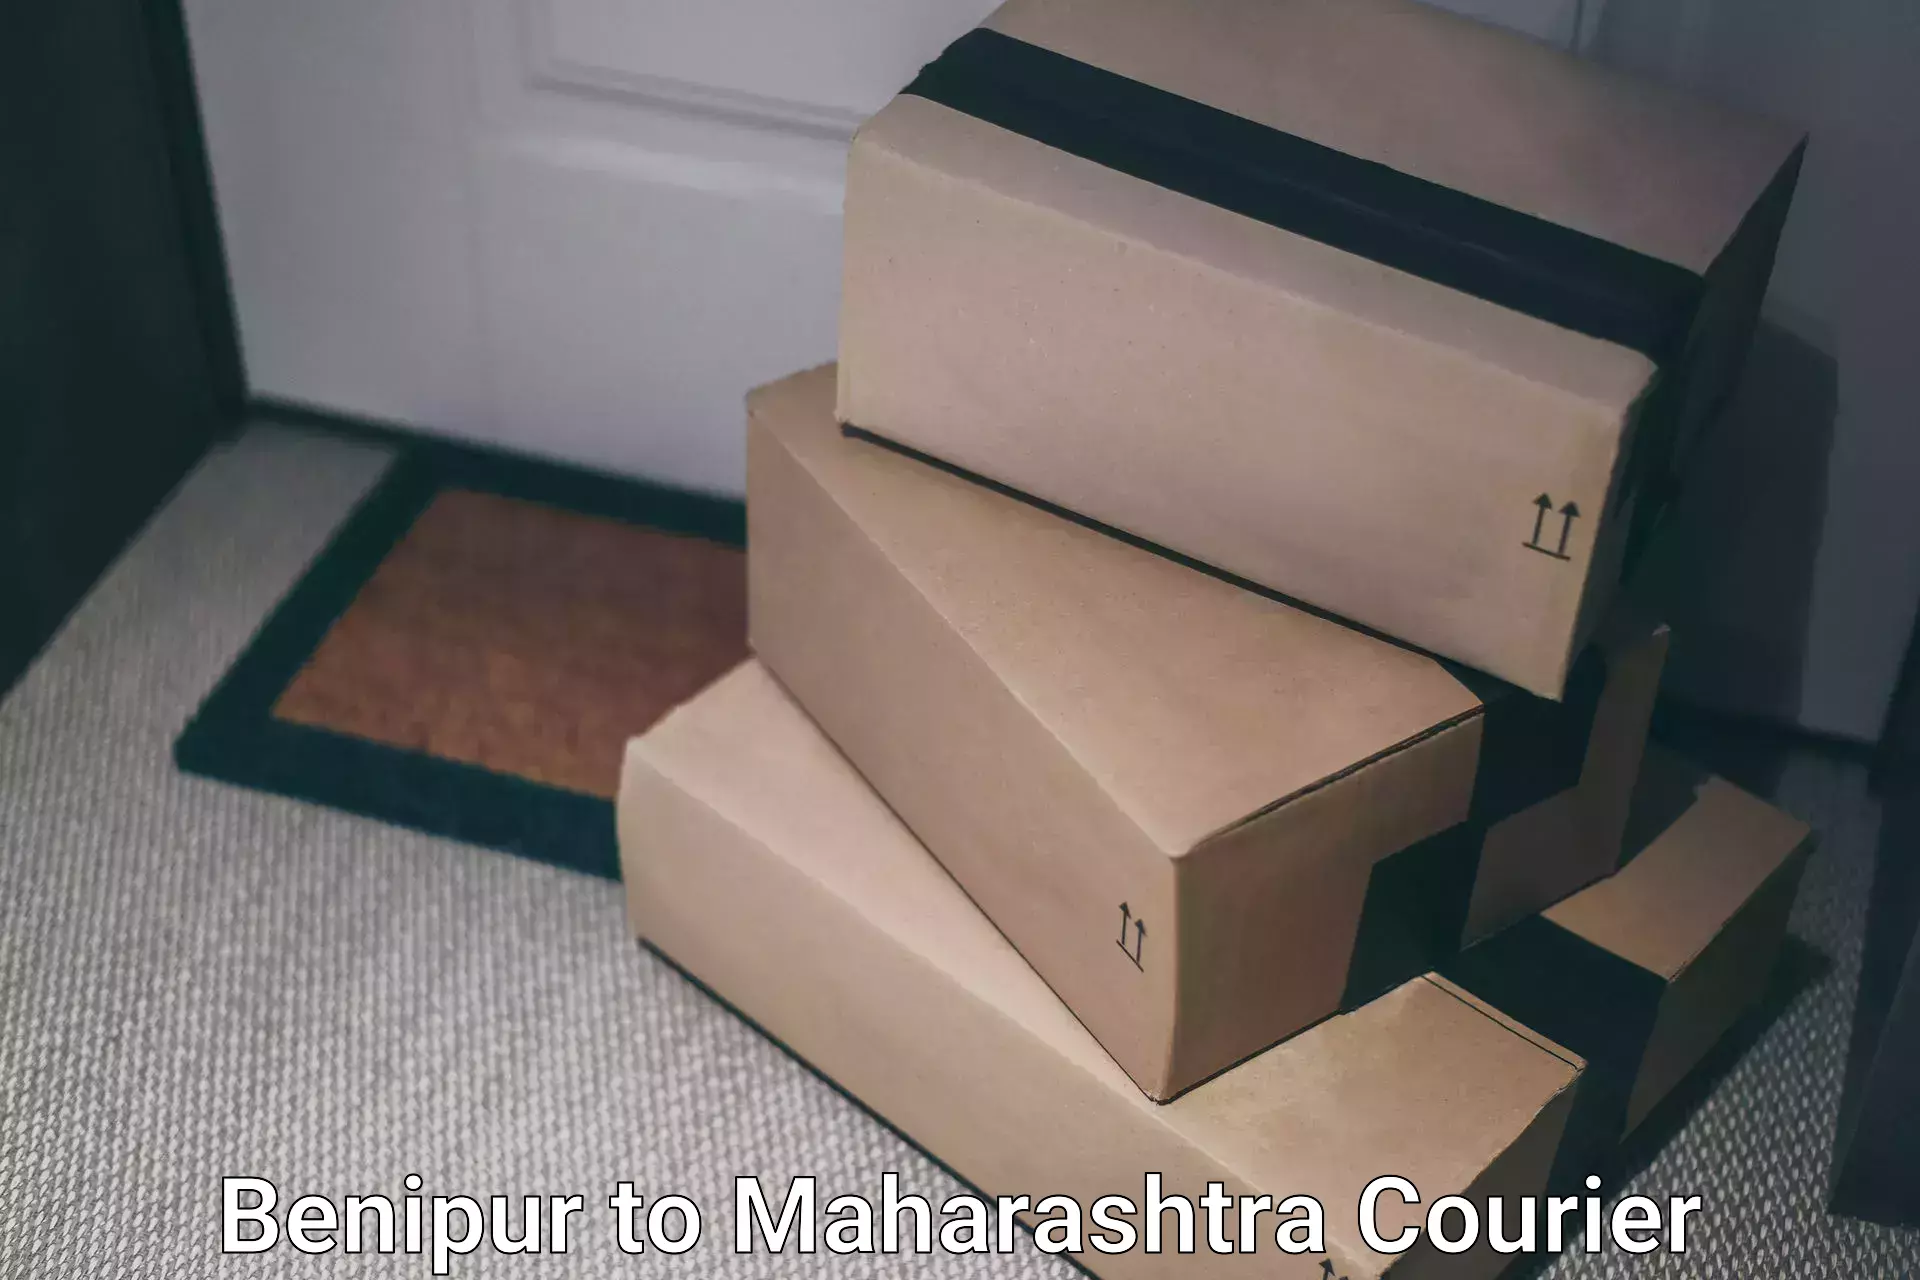 Comprehensive shipping services Benipur to Pimpri Chinchwad